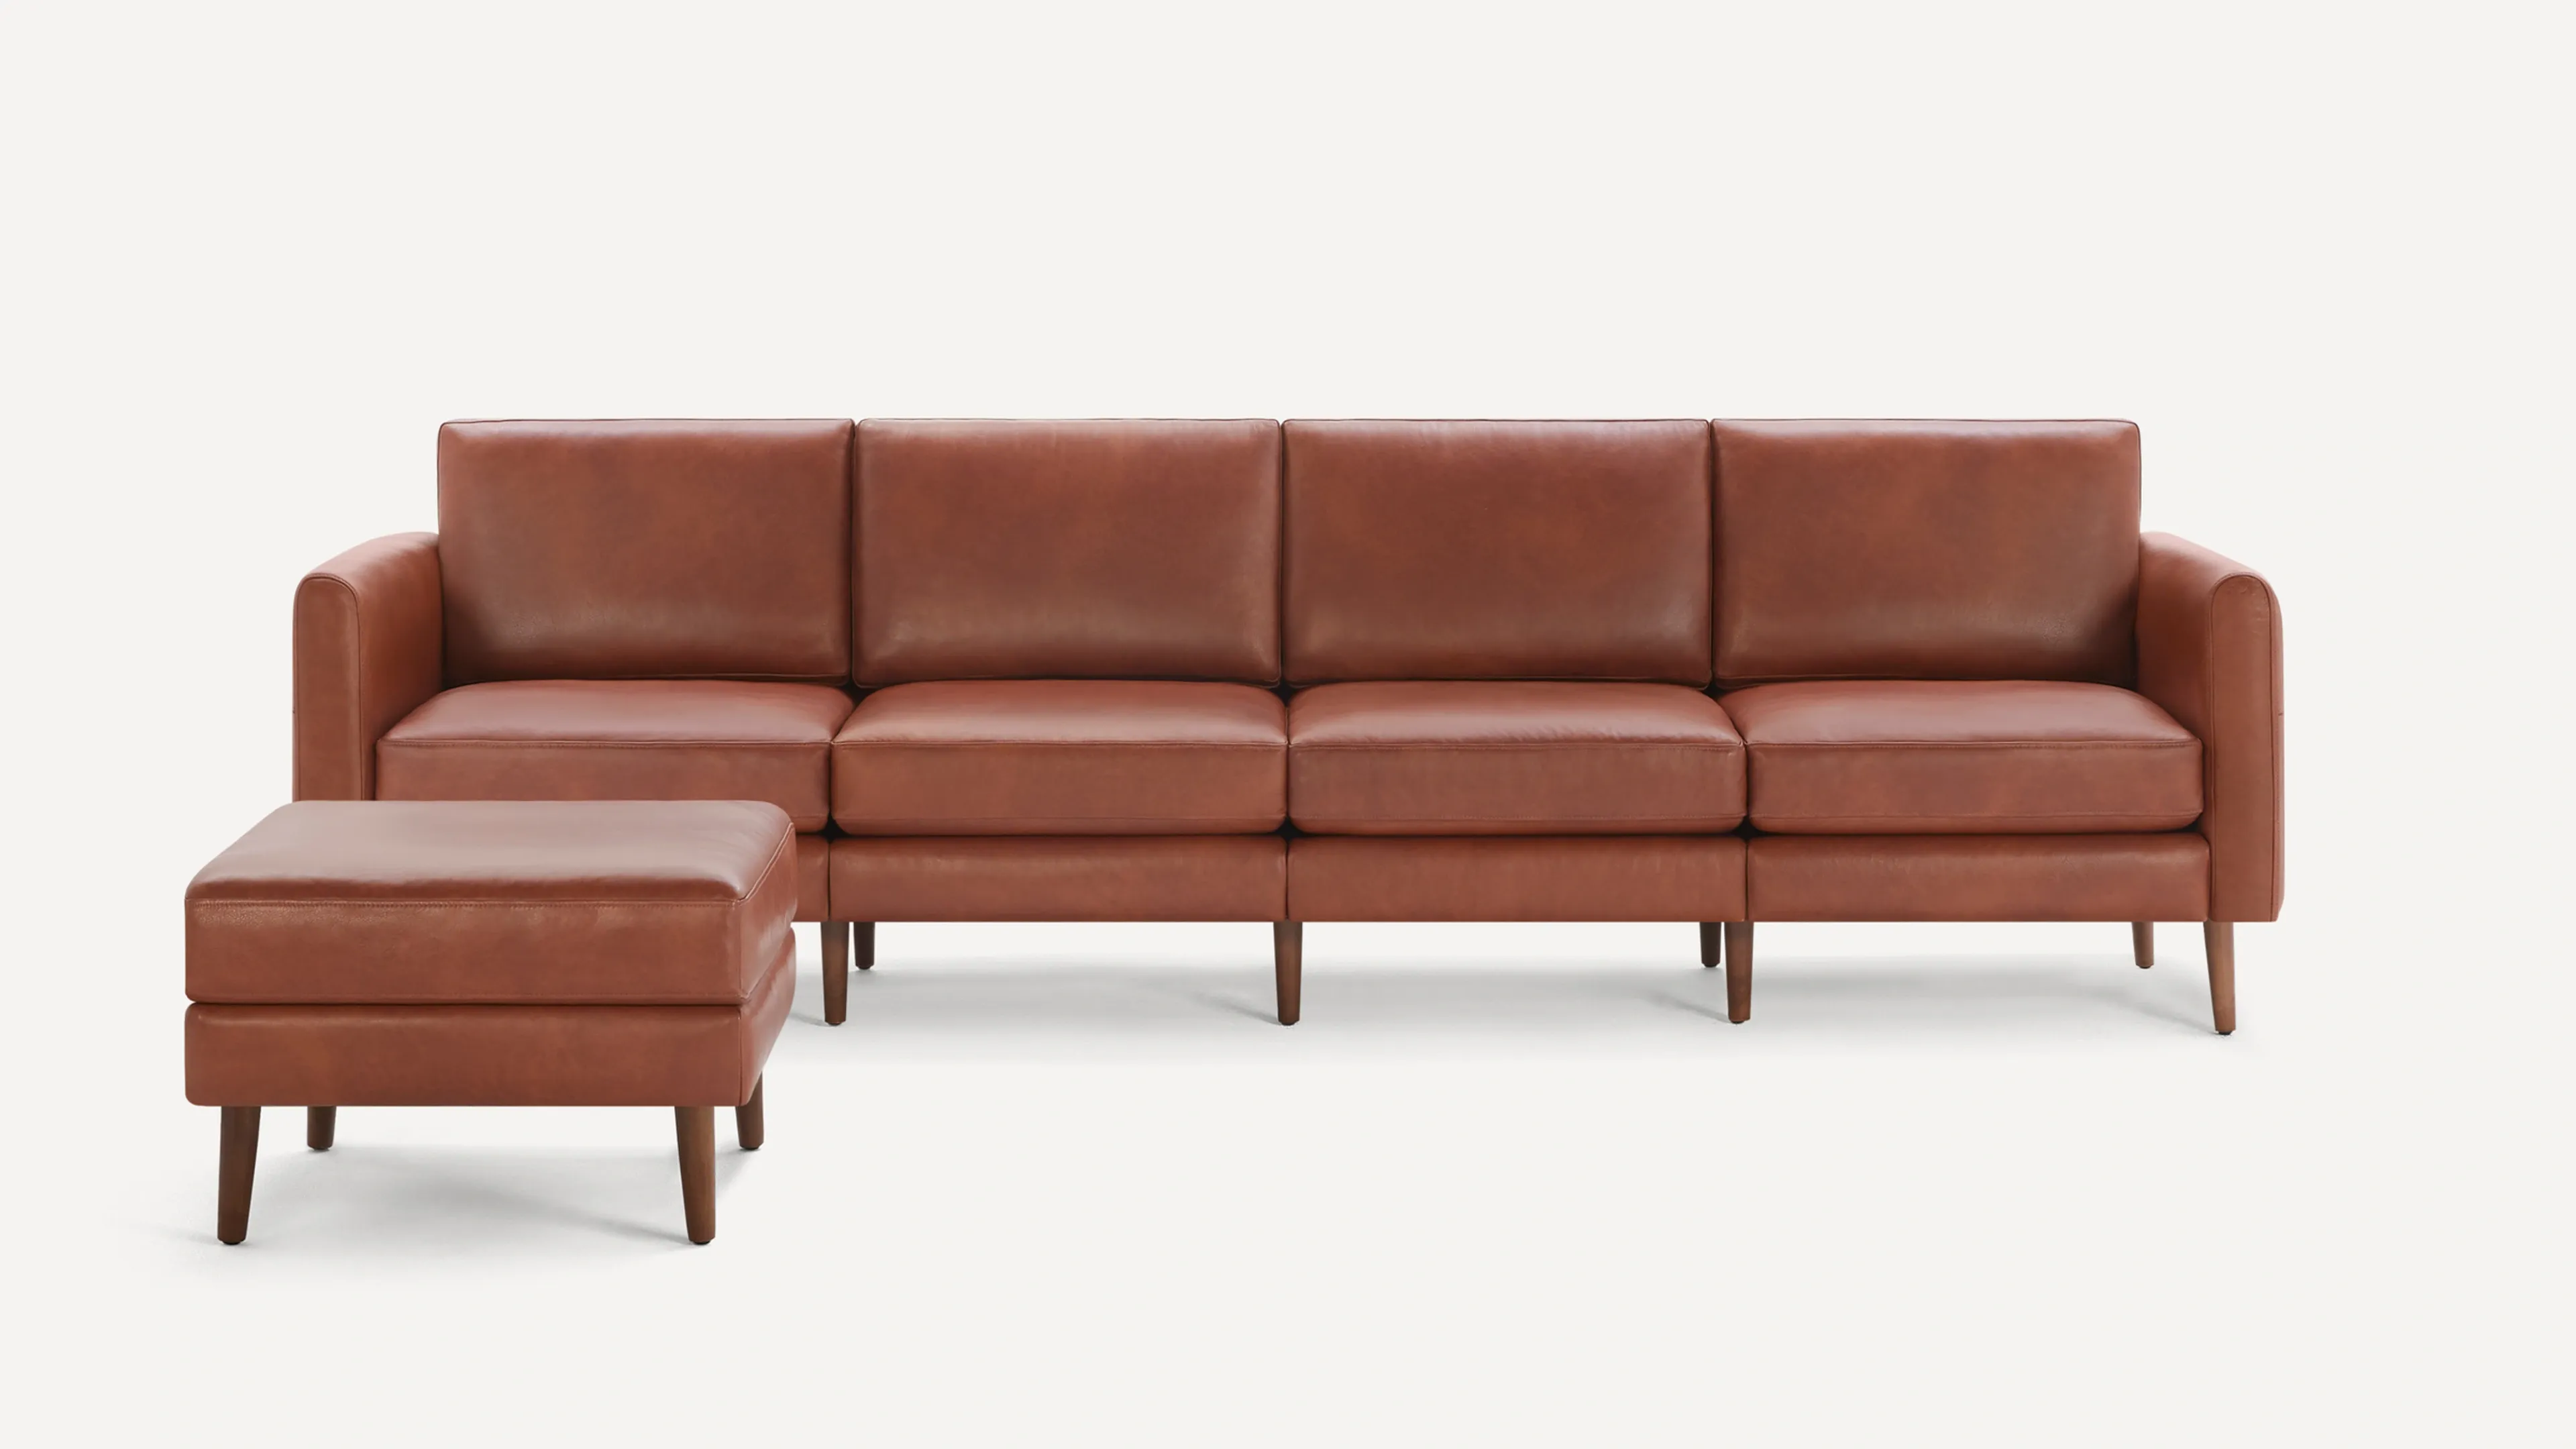 Original King Sofa with Ottoman in Chestnut Leather